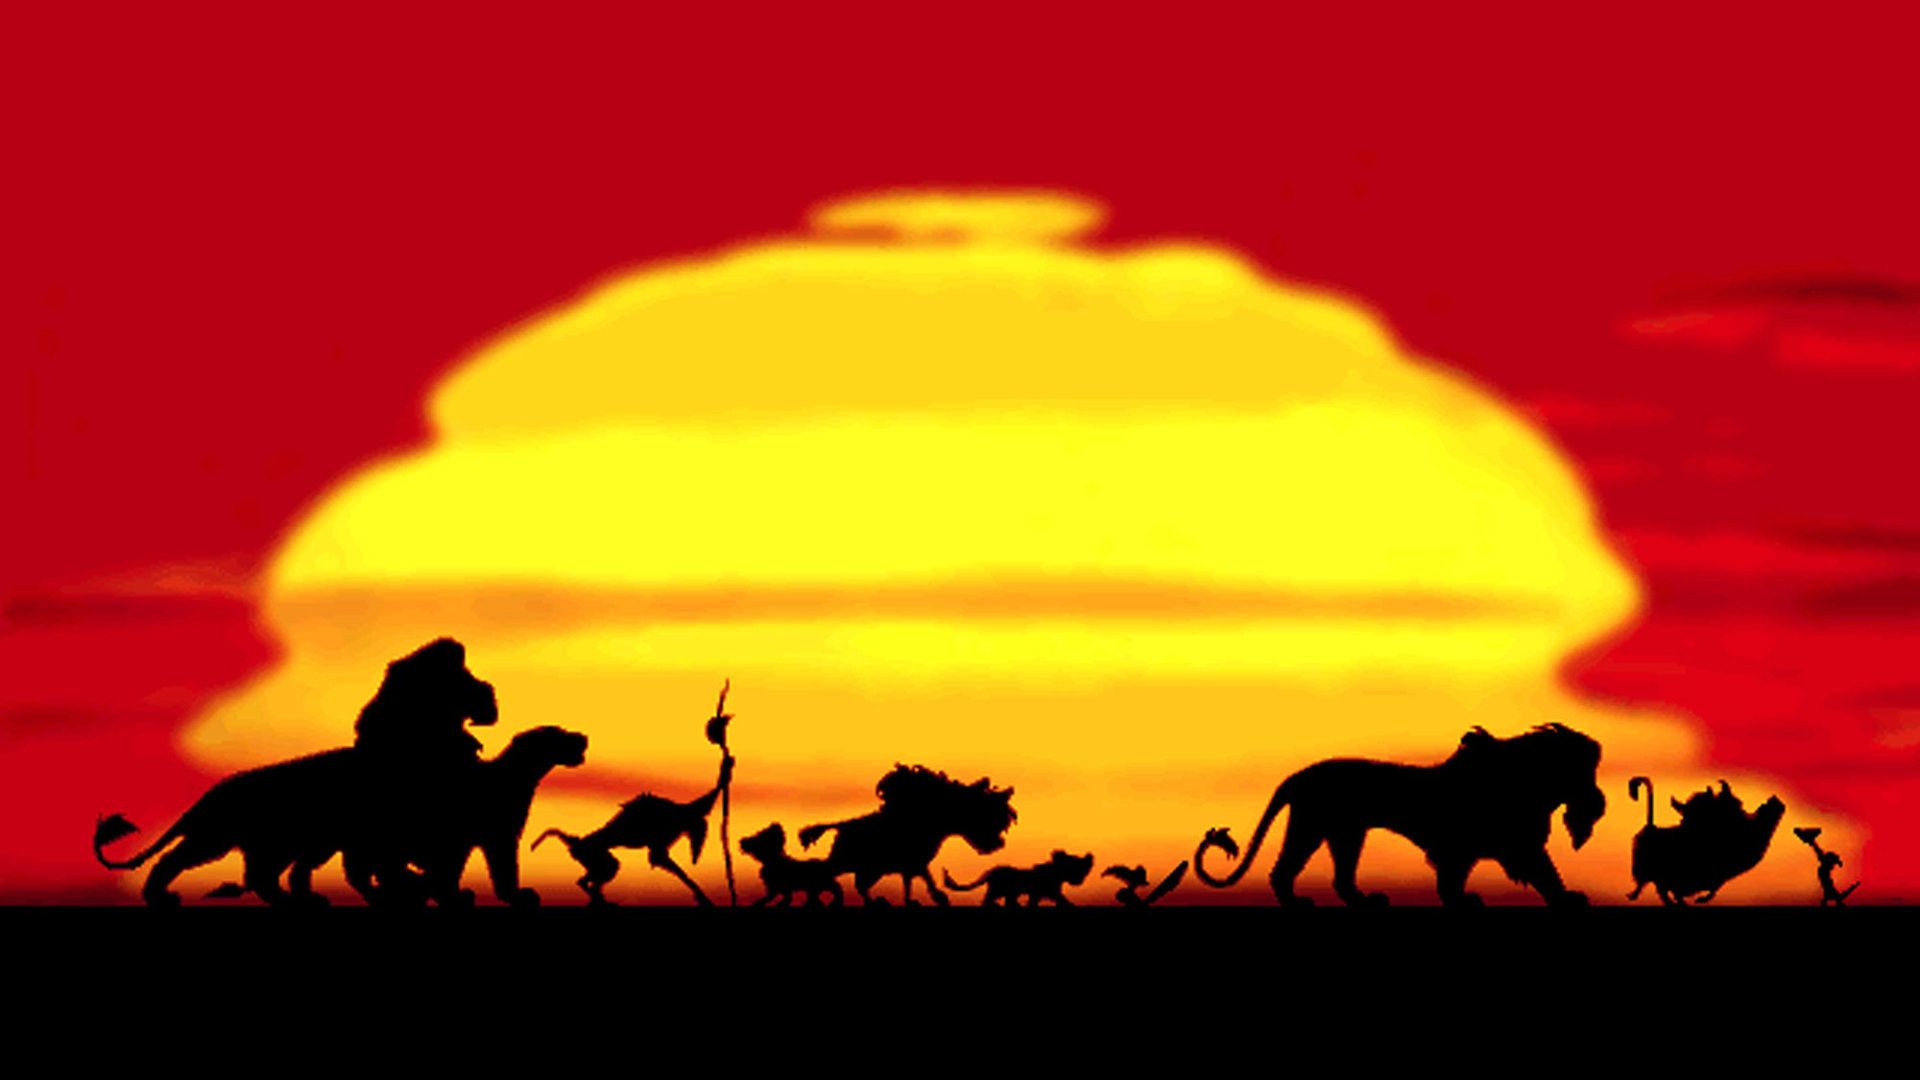 The Lion King Wallpaper for MacBook - Cartoons Backgrounds